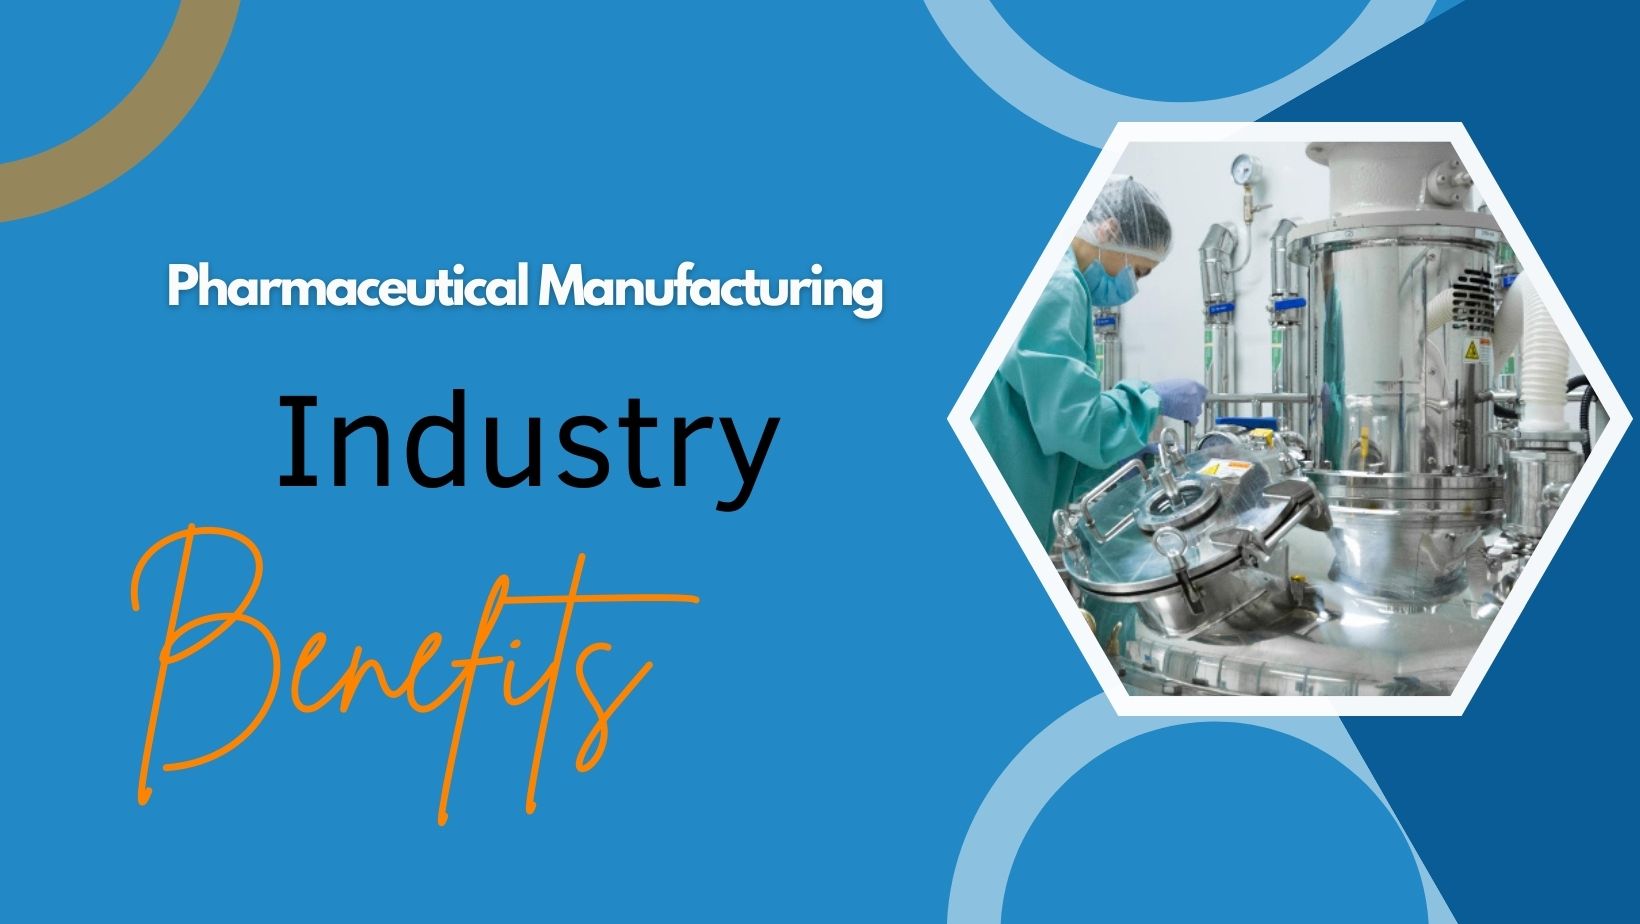 Pharmaceutical Manufacturing Industry Benefits